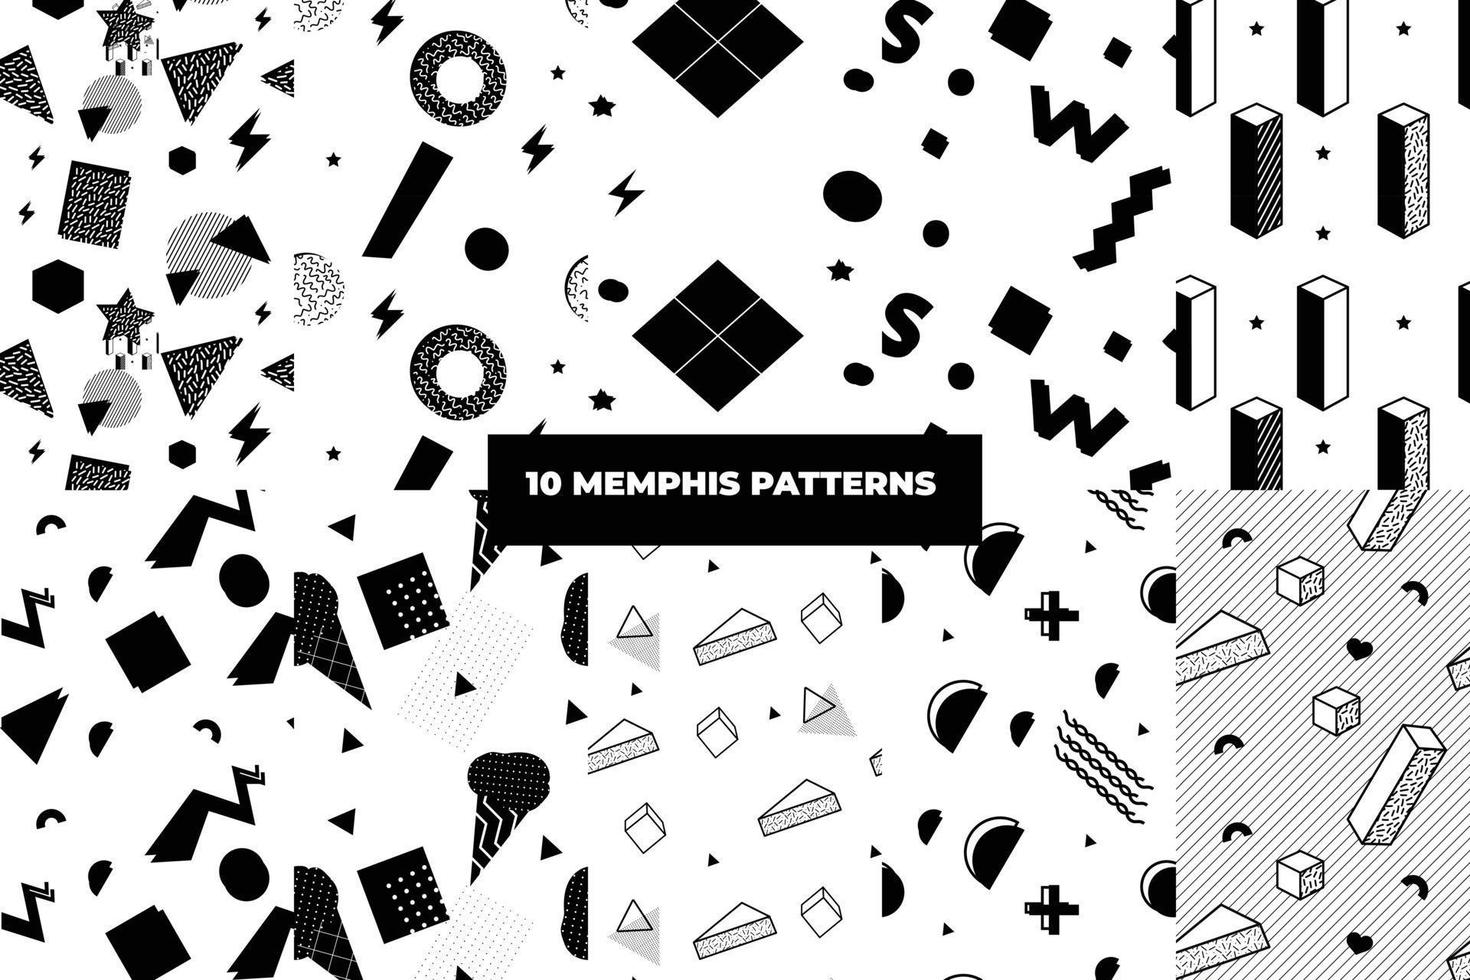 Set of Memphis Pattern. Black, white, grey colors. Memphis Style Funky Patterns. Hipster Style 80s-90s. Vector illustration. Suitable for banners, funky posters, flyers, covers.